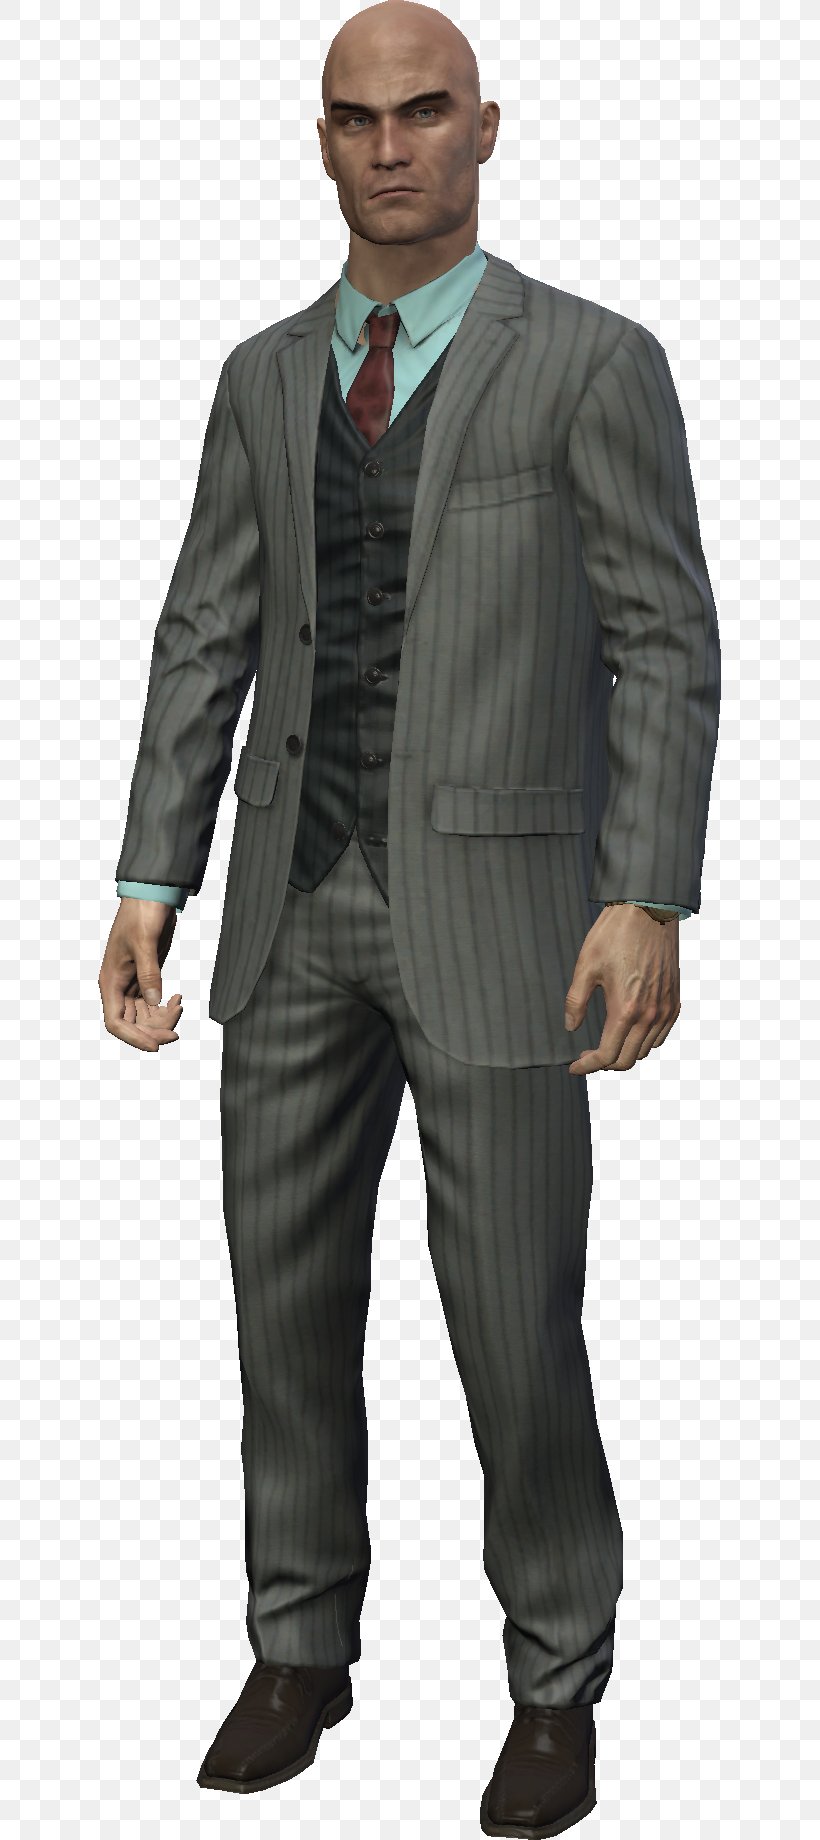 Hitman: Absolution Agent 47 Suit Costume, PNG, 623x1840px, Hitman Absolution, Agent 47, Businessperson, Clothing, Costume Download Free